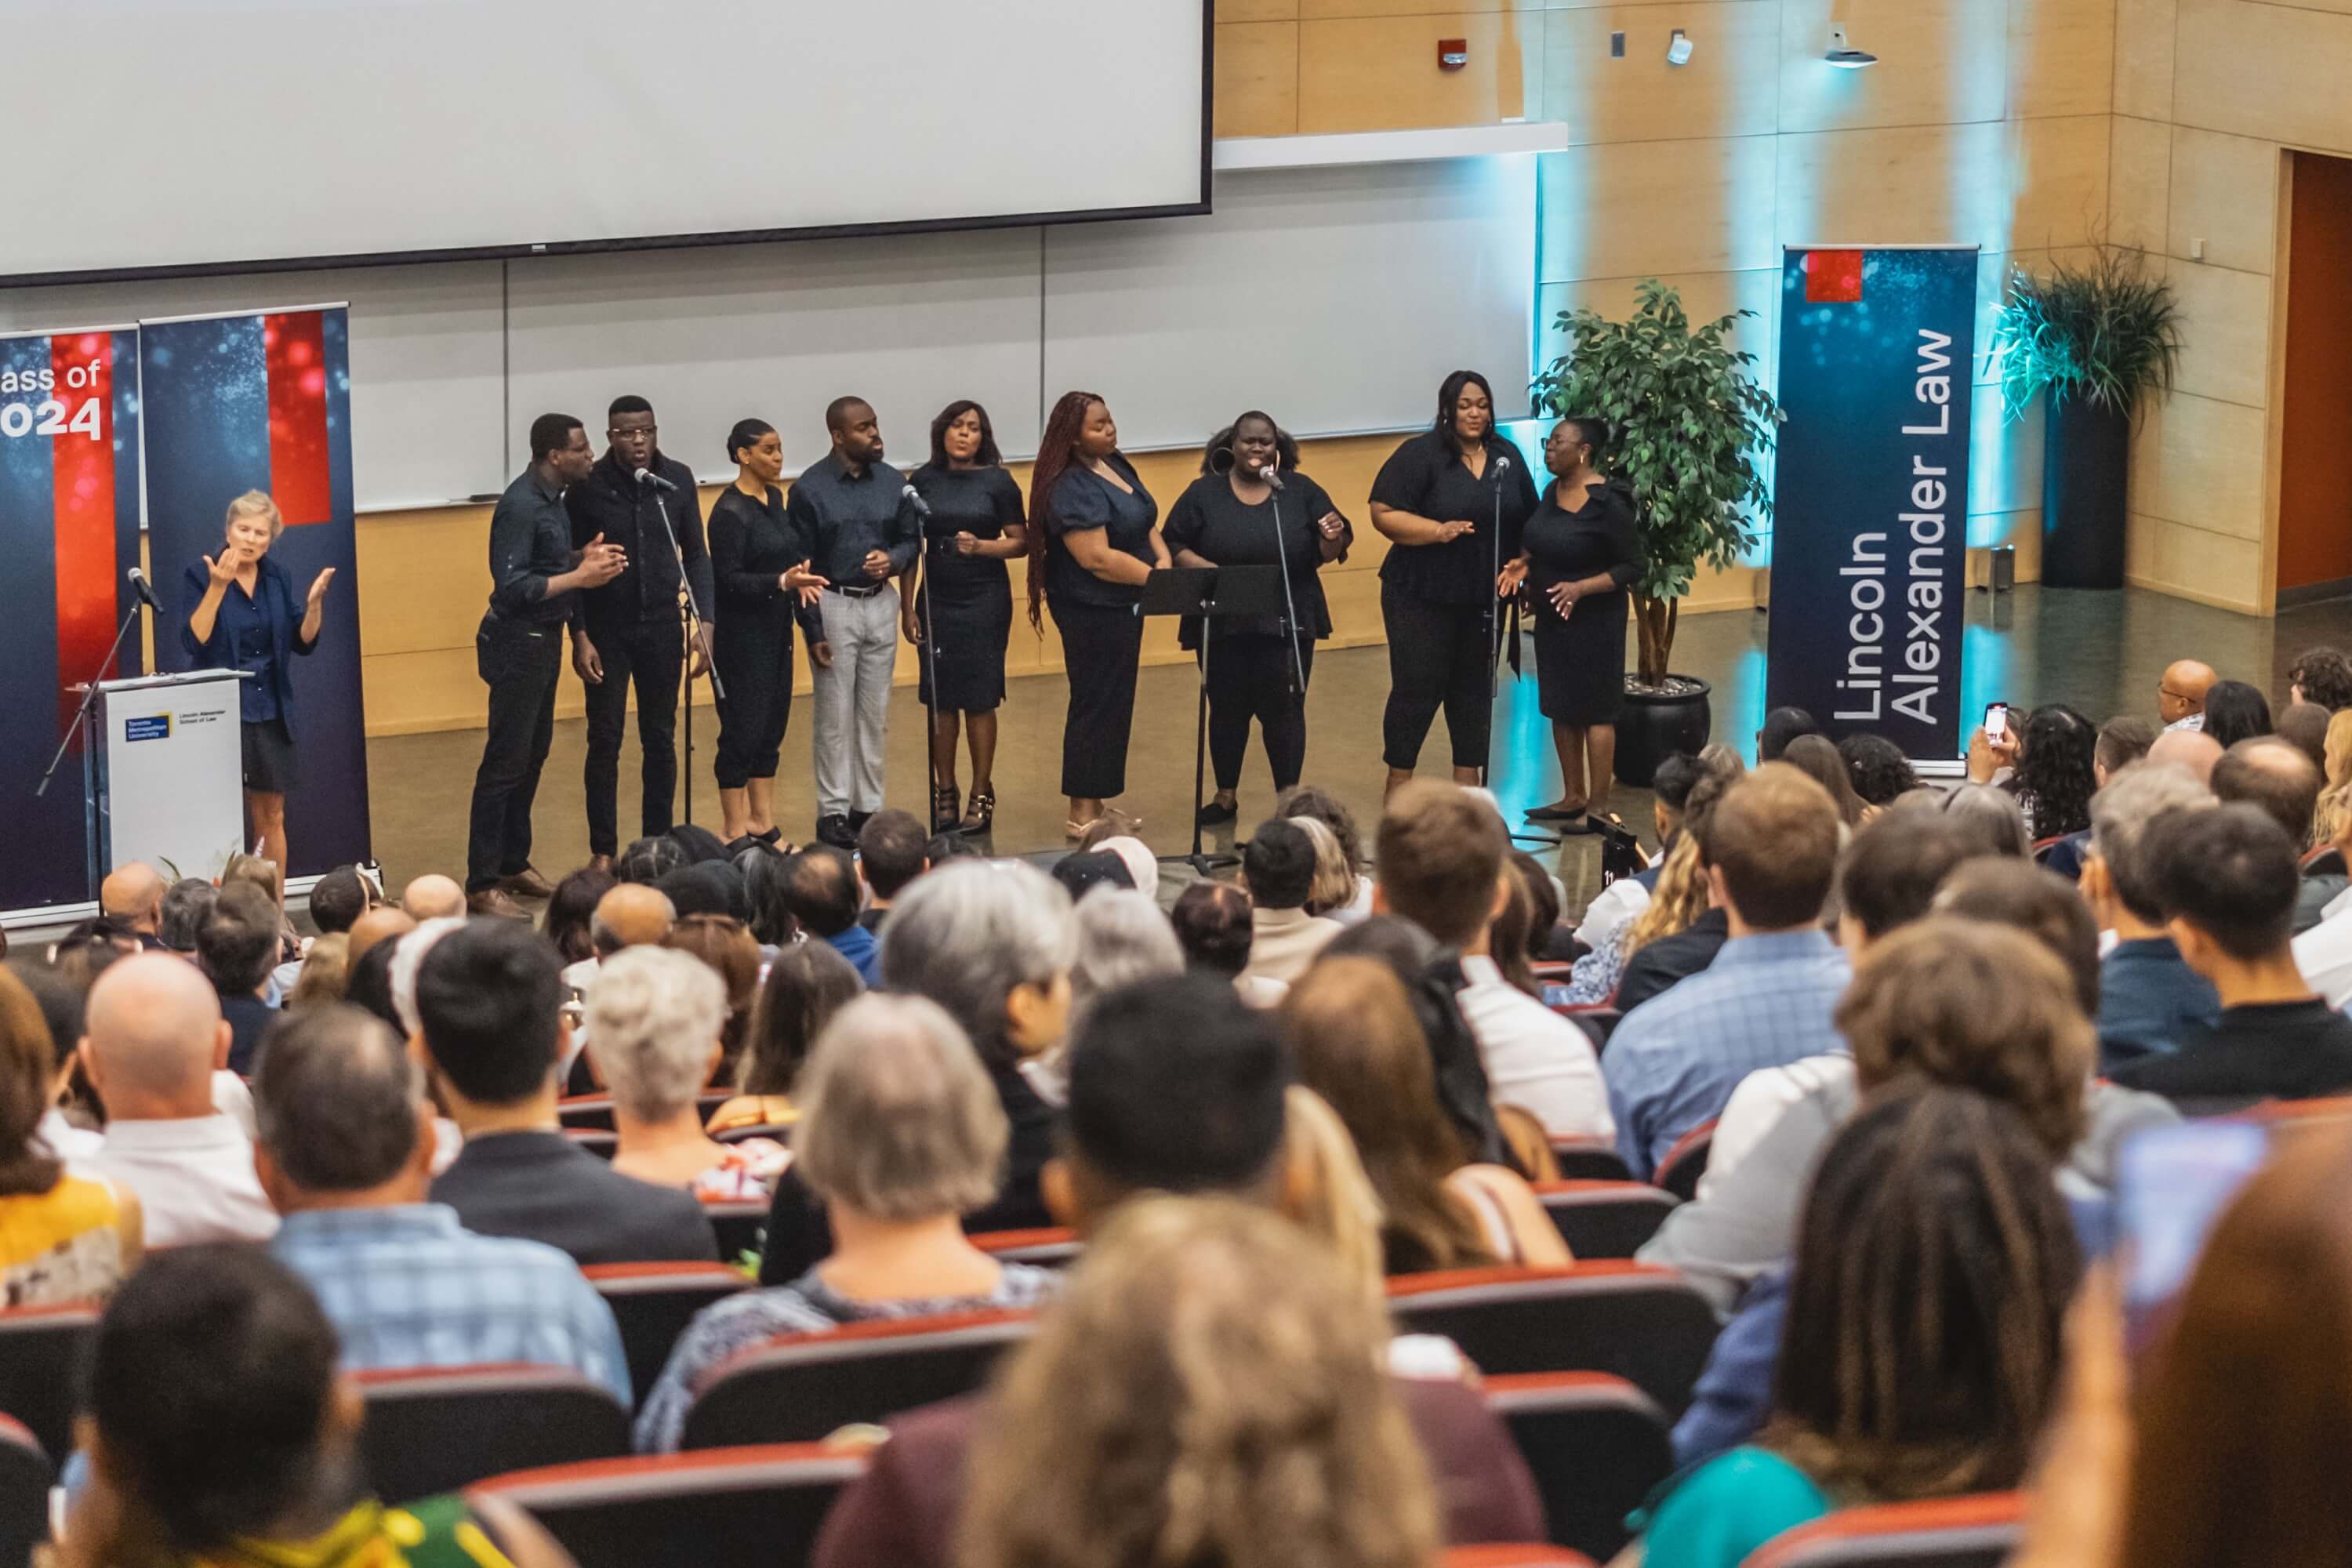 A group of singers all wearing black clothes performing for an audience in an auditorium. 